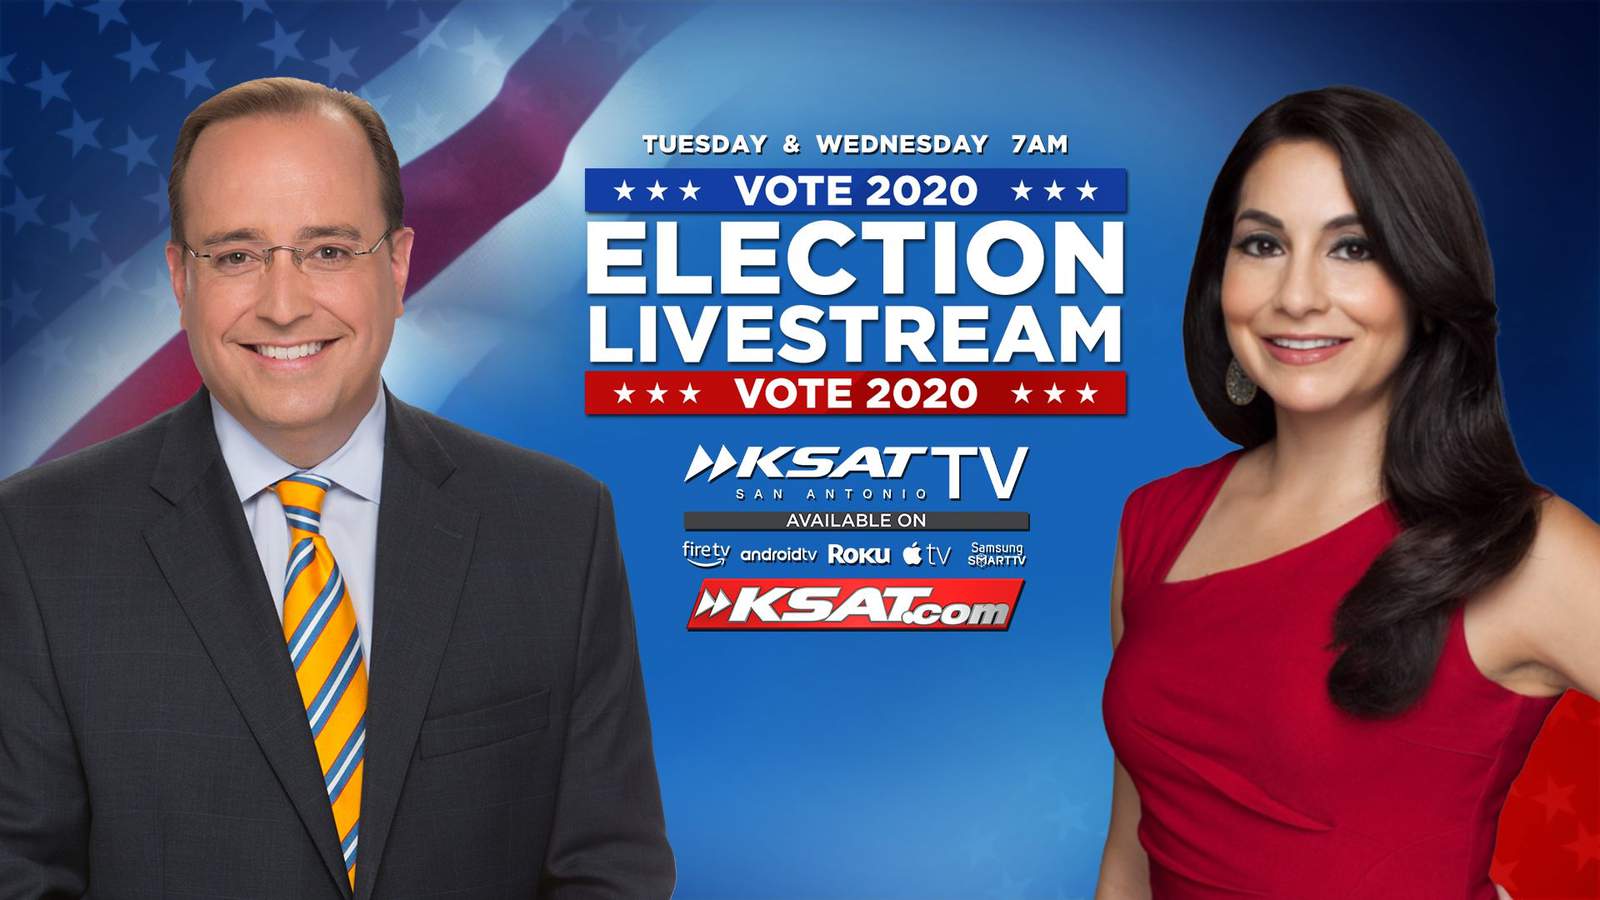 WATCH: KSAT anchors, reporters rehash election night on Wednesday at 7 a.m. in livestream